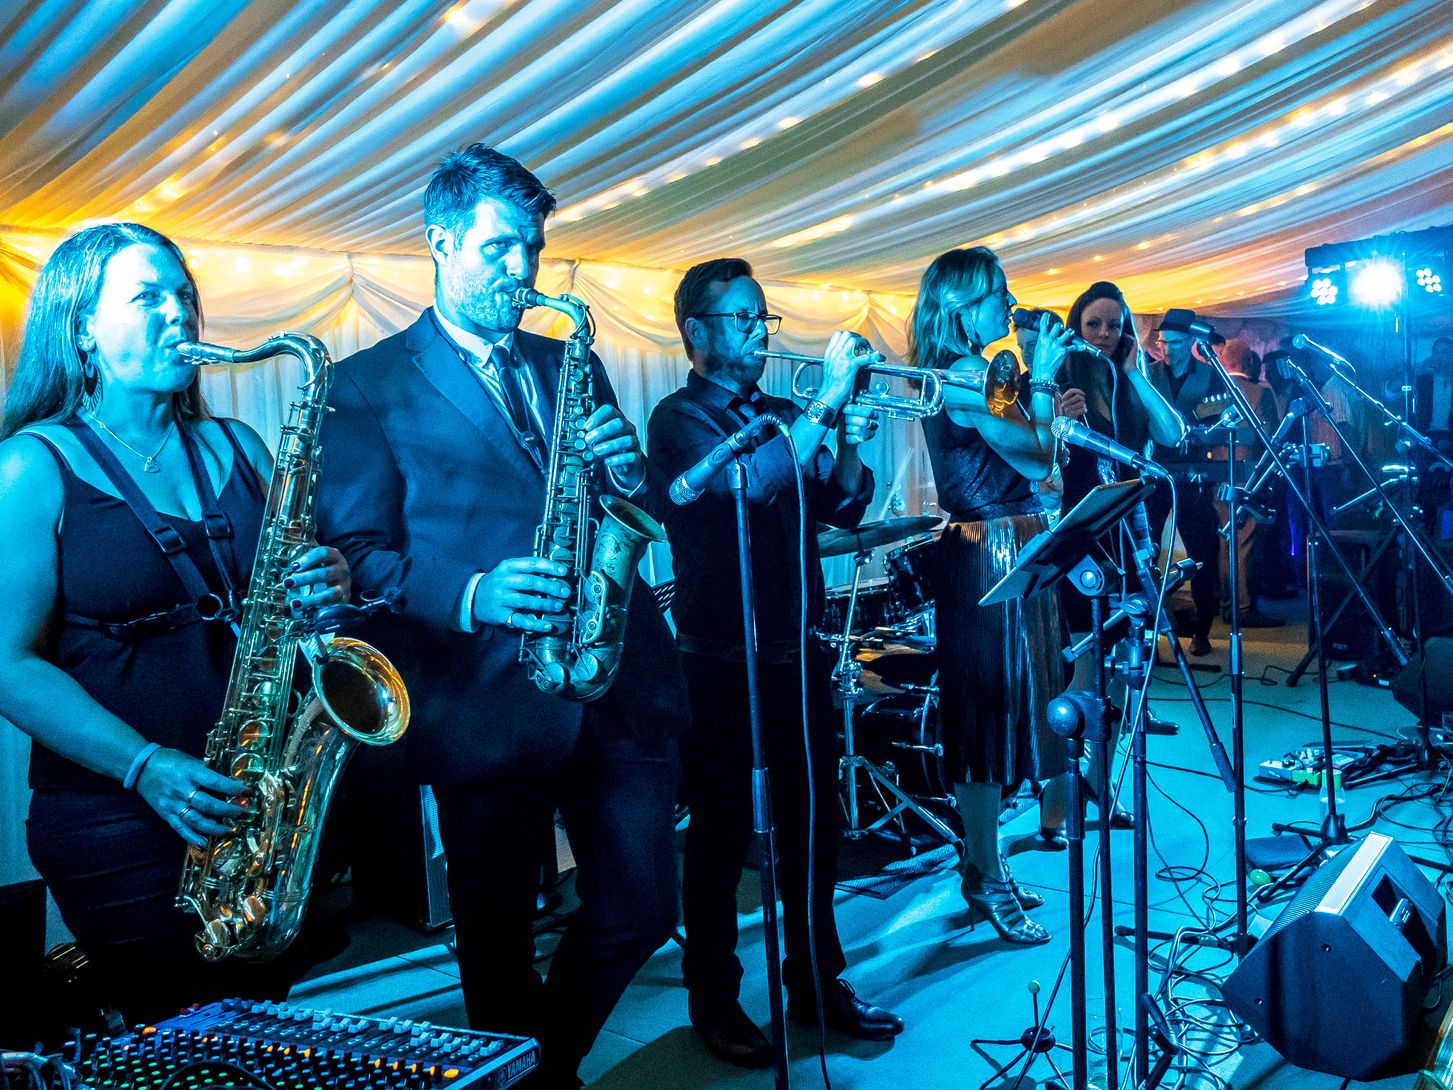 horn section, soul band, band with horns, brass section, 